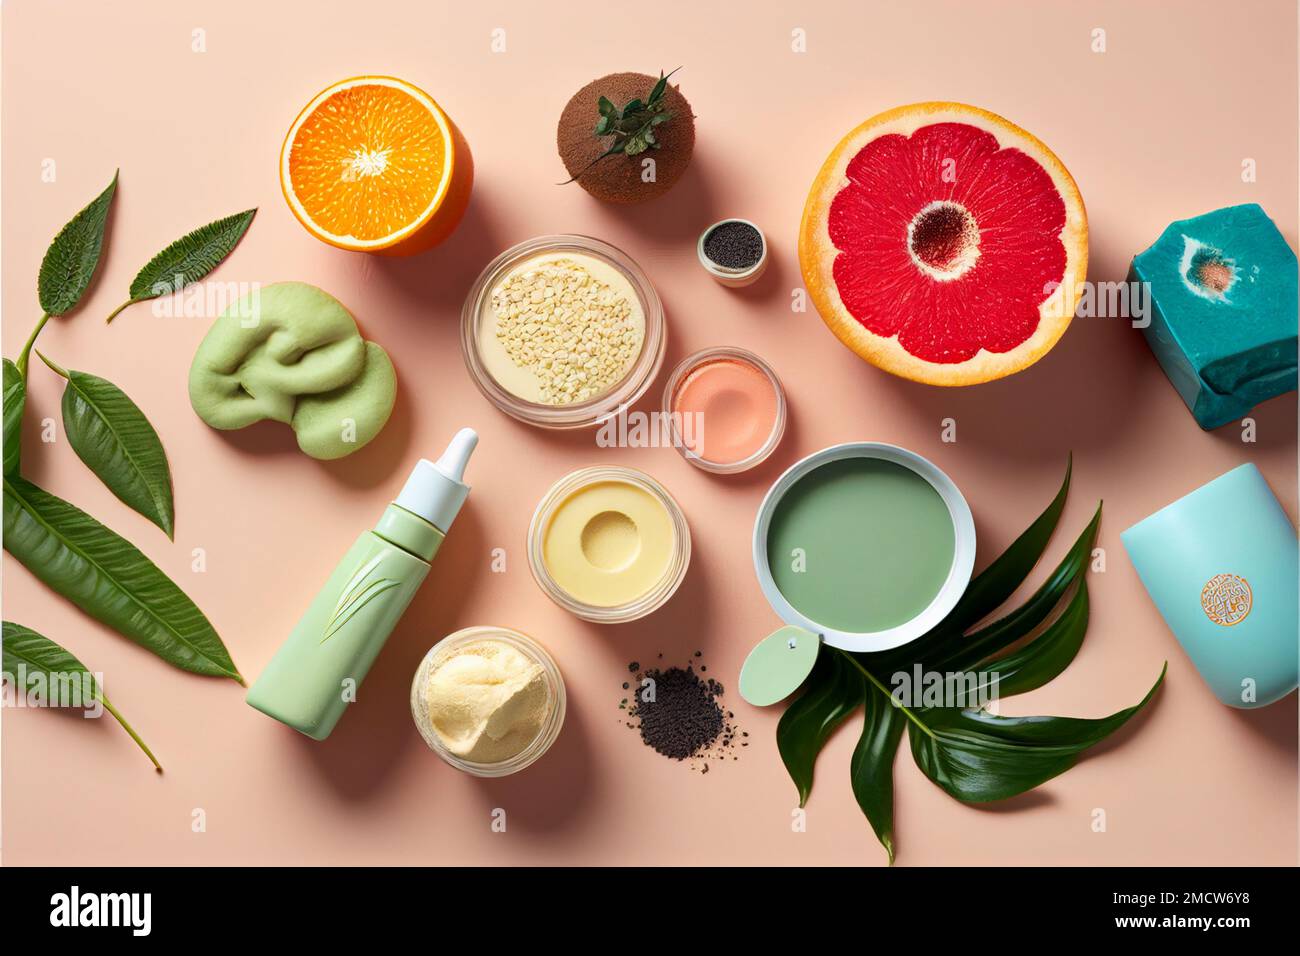 A top view of Cosmetic skincare ingredients with healthy elements, Orange, Grapefruit and avocado Stock Photo